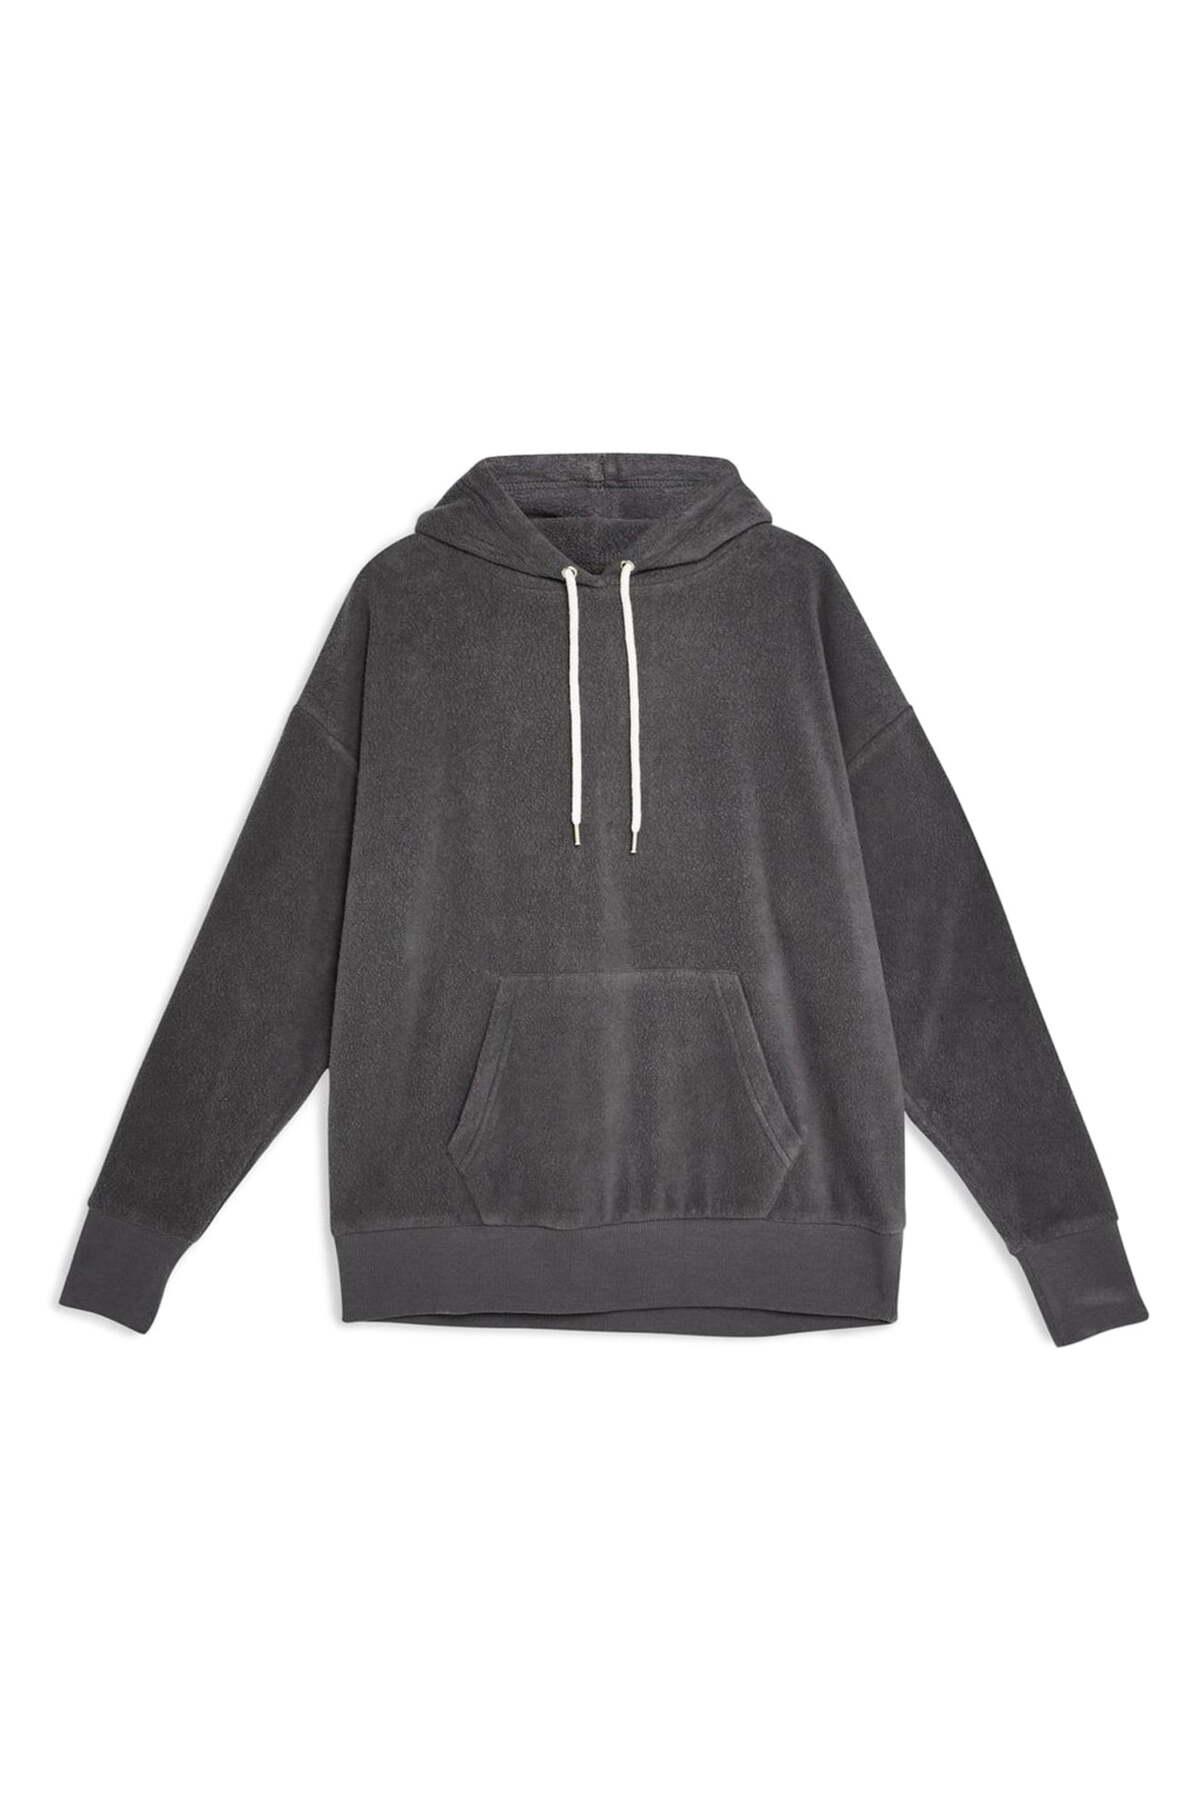 TOPSHOP Cotton Soft Textured Hoodie in Charcoal (Gray) - Lyst